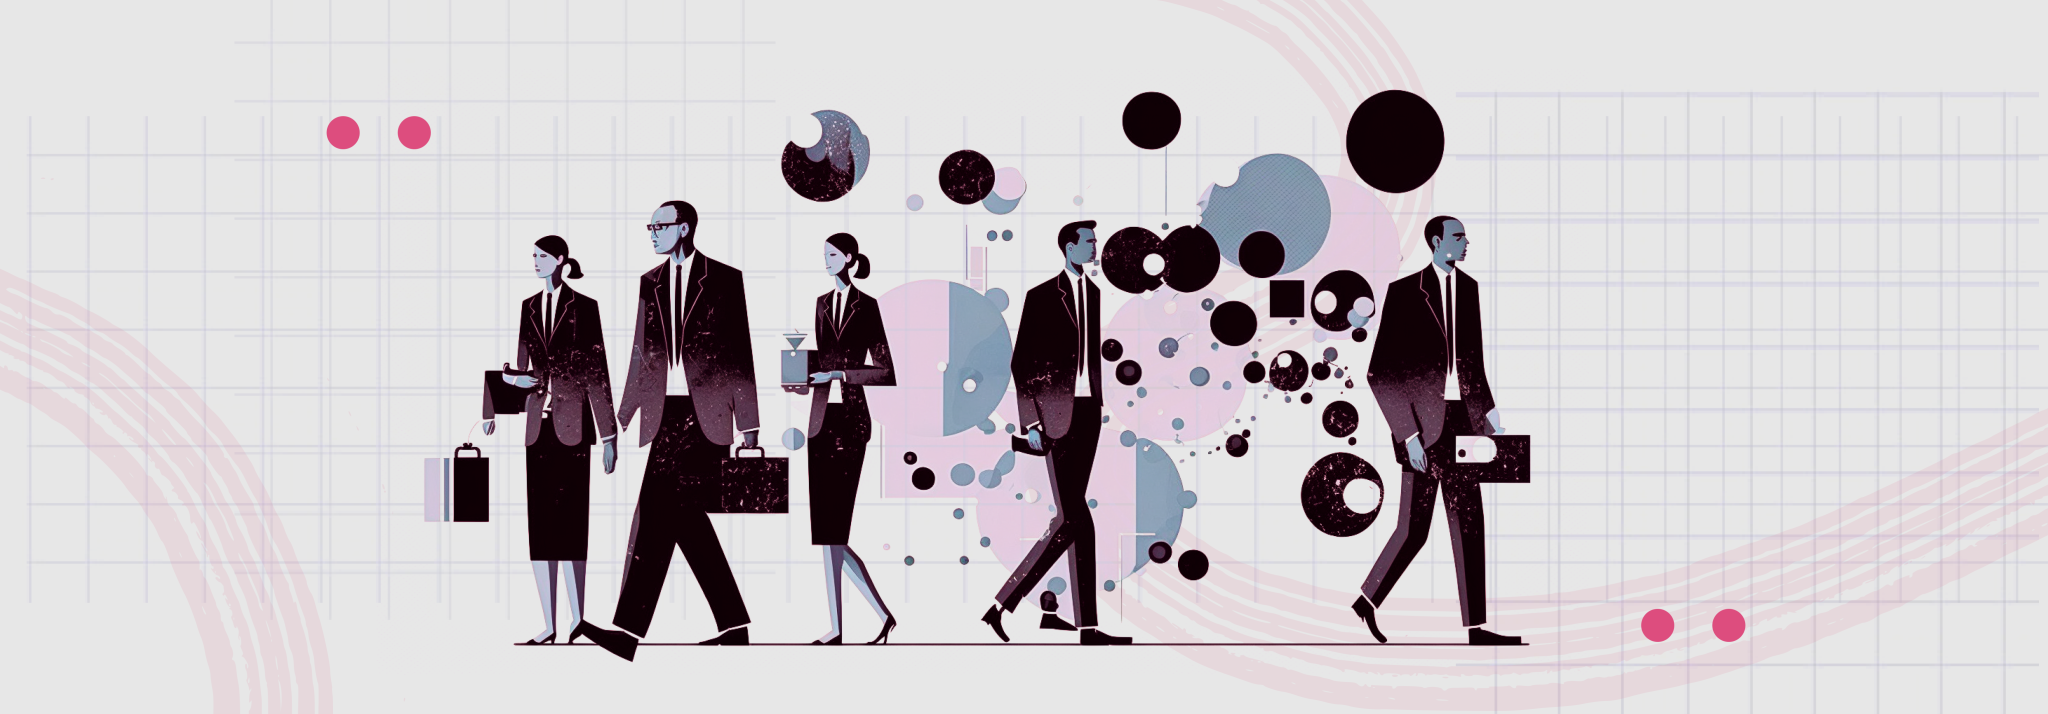 An illustration of people walking in office attire representing the financial sector